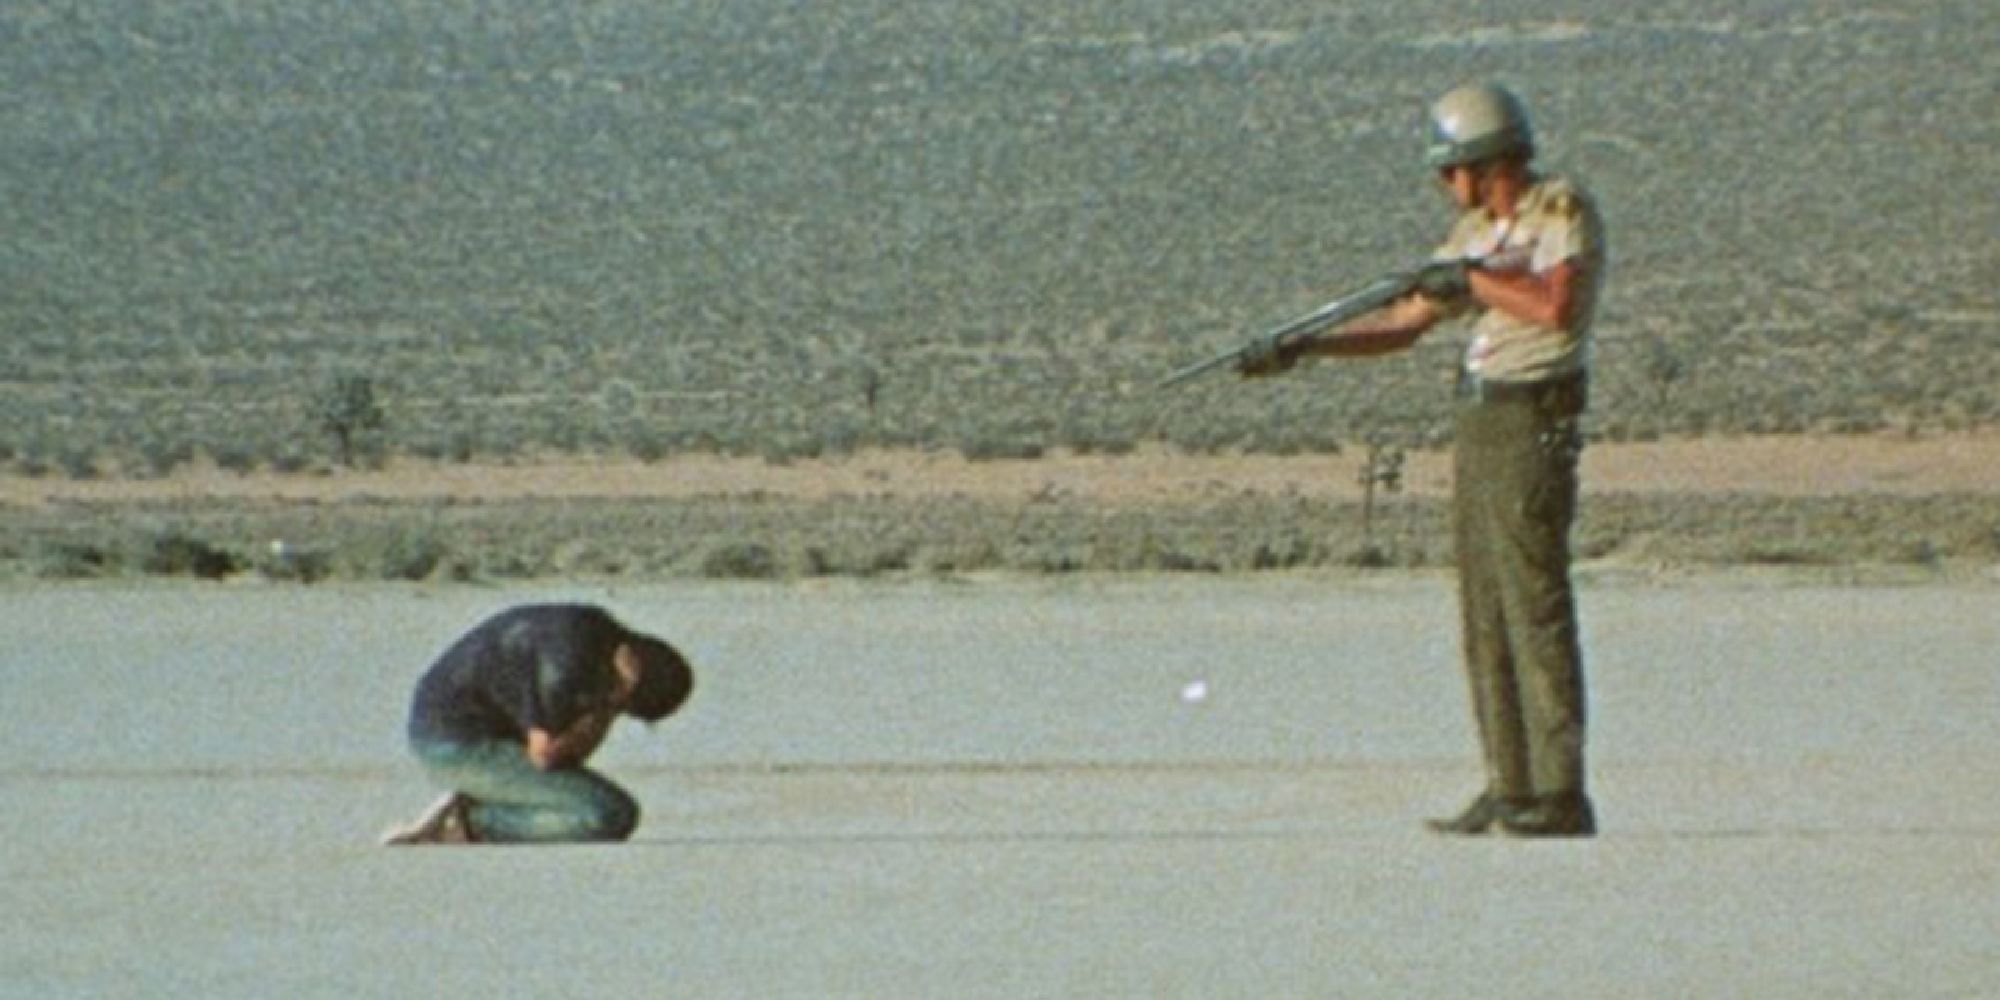 A police officer aiming a shotgun at a man on his knees